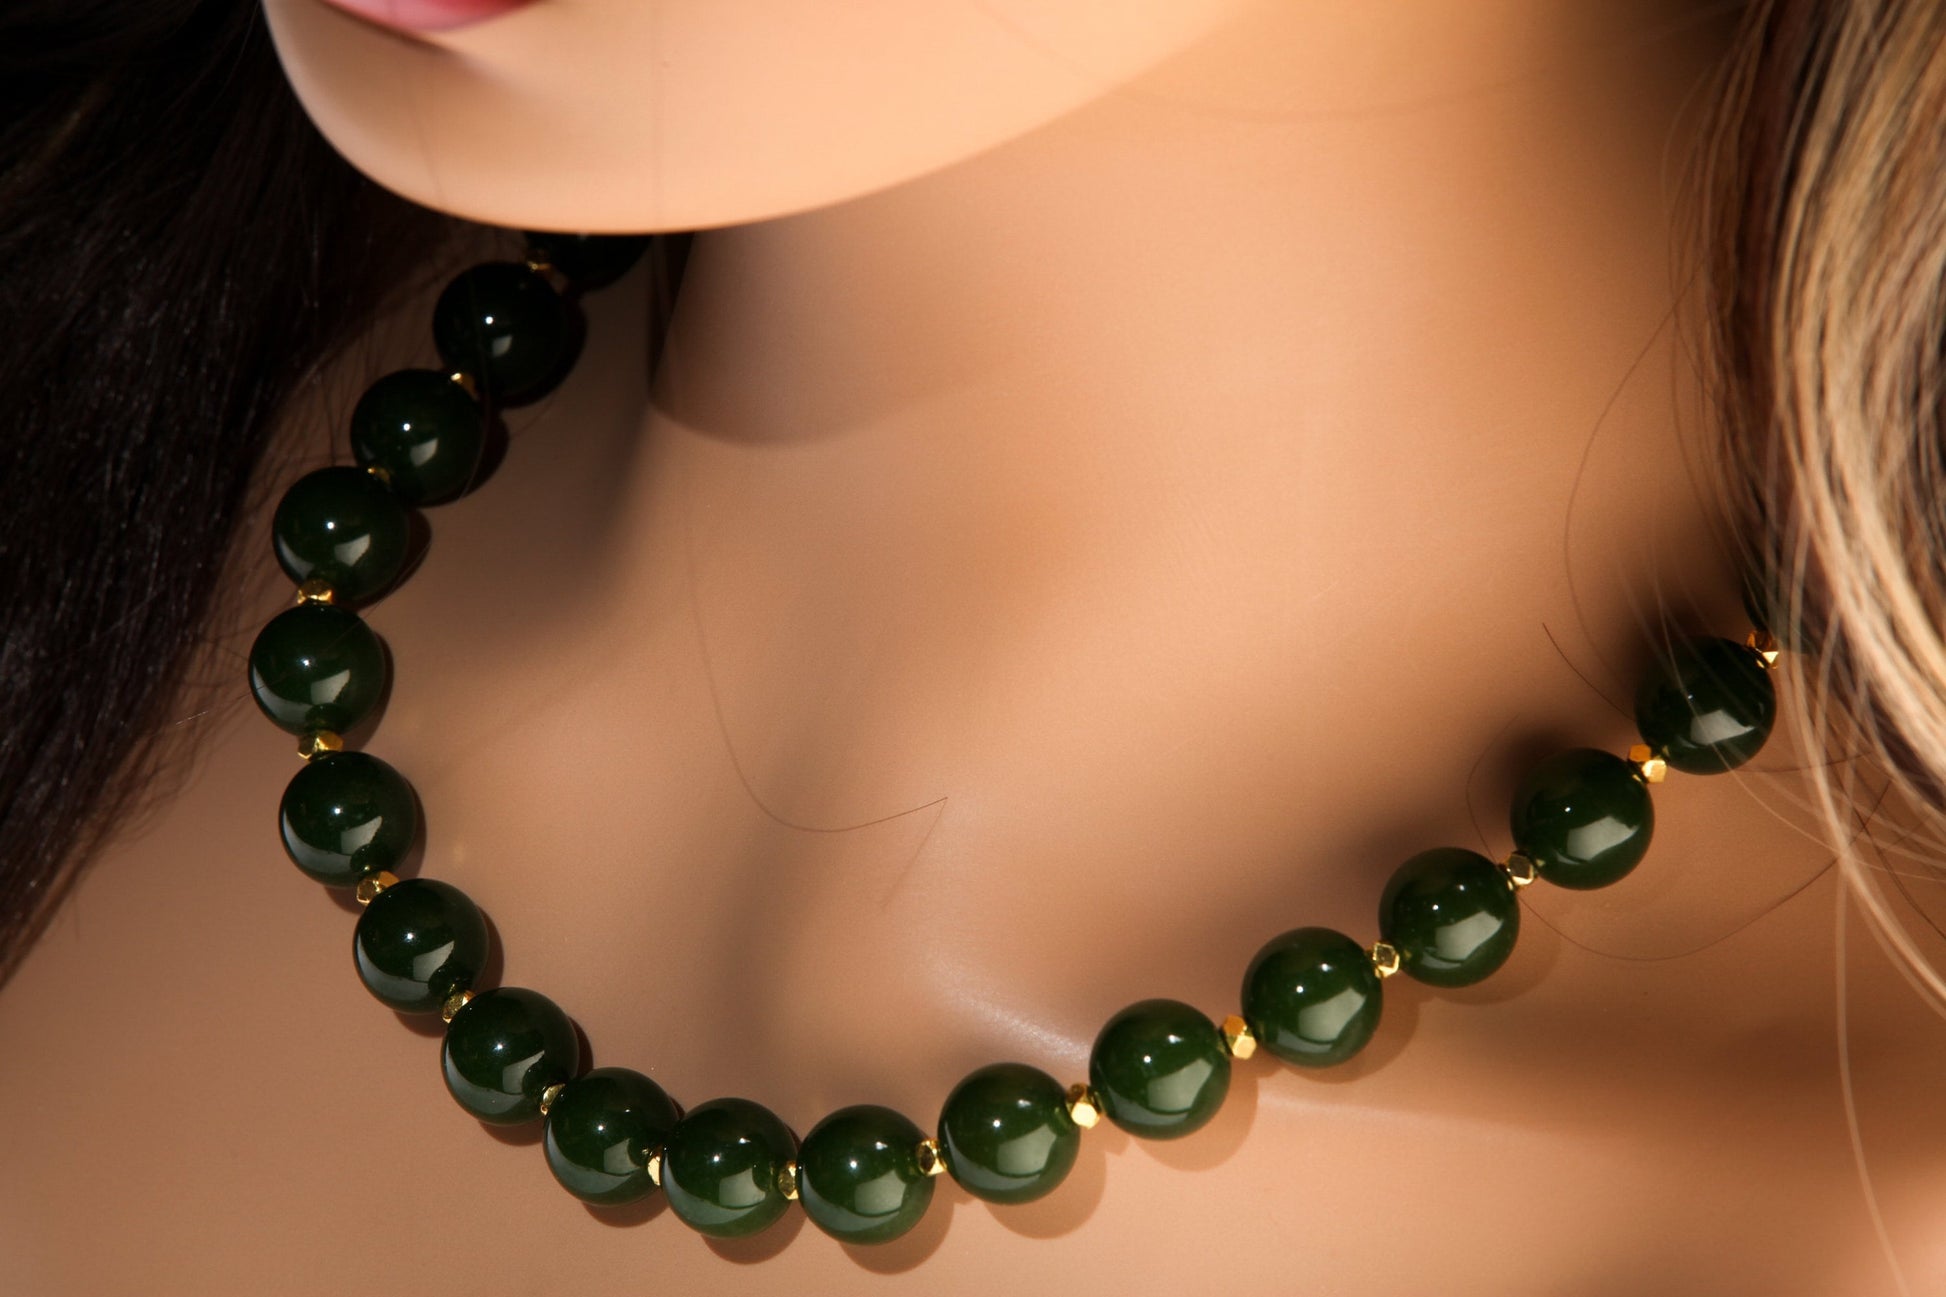 Canadian Nephrite Jade 12mm 18”Gold Necklace with 2” Extension Chain. High Quality Natural Jade smooth polished Bead. Gift for Mom